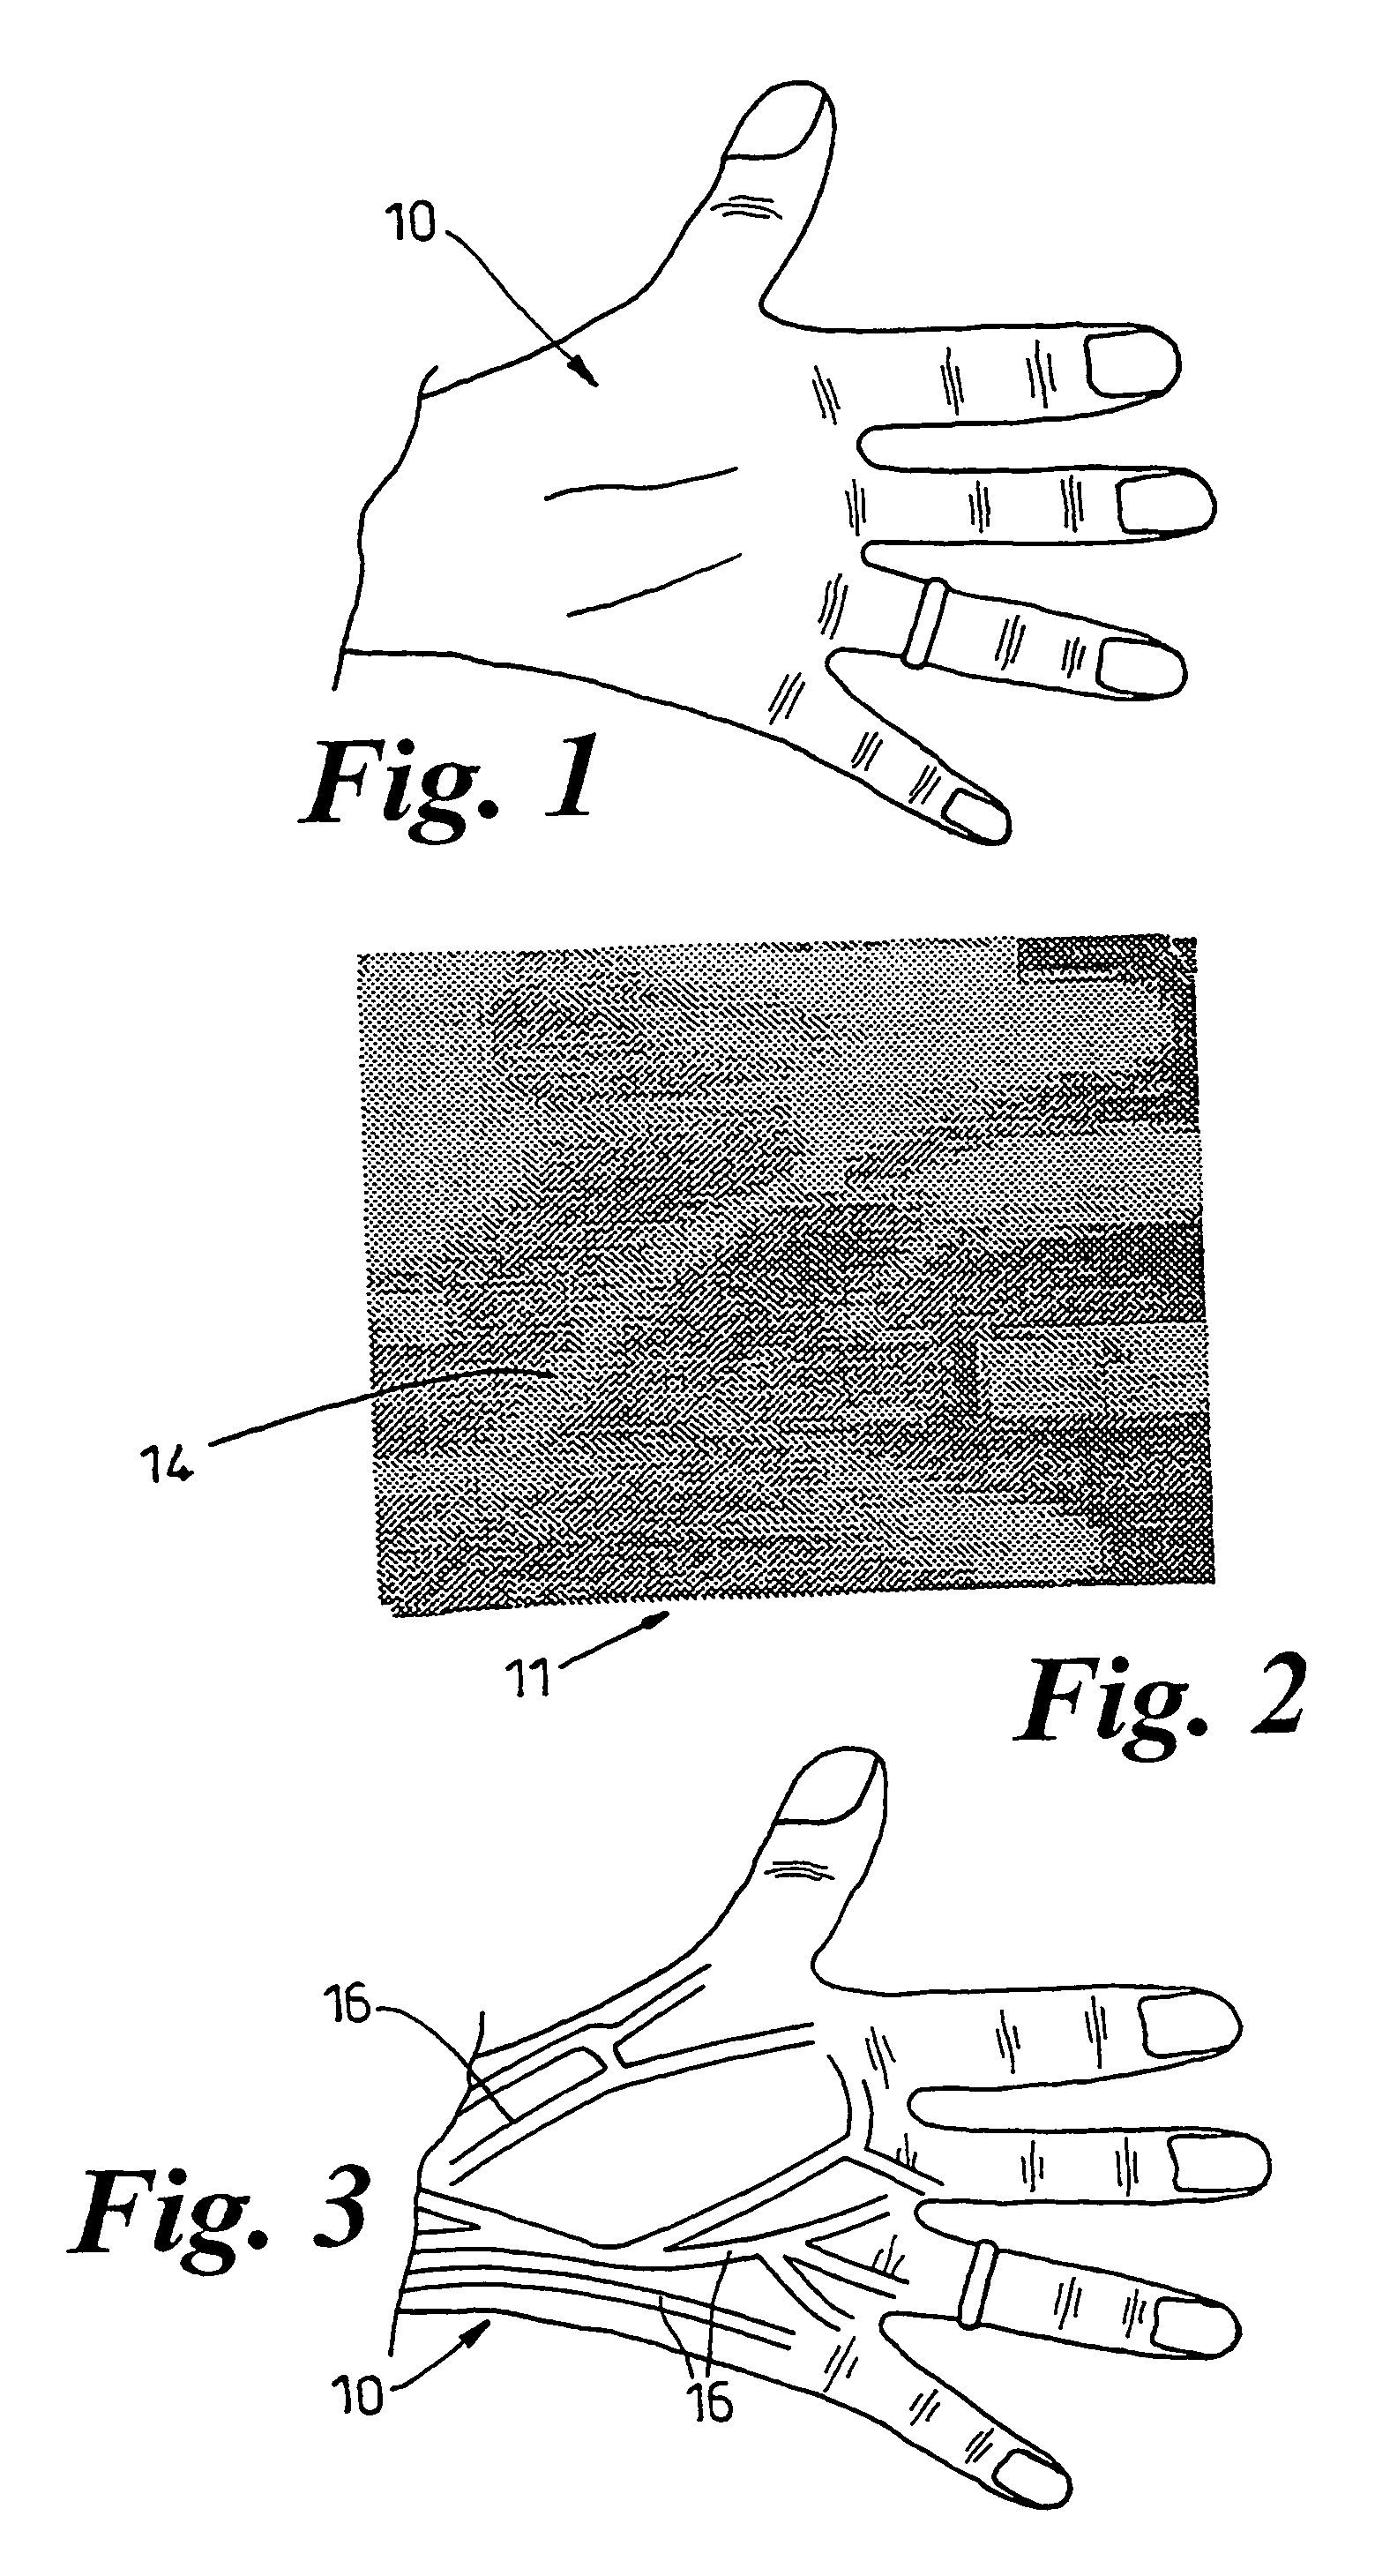 Illumination and imaging devices and methods